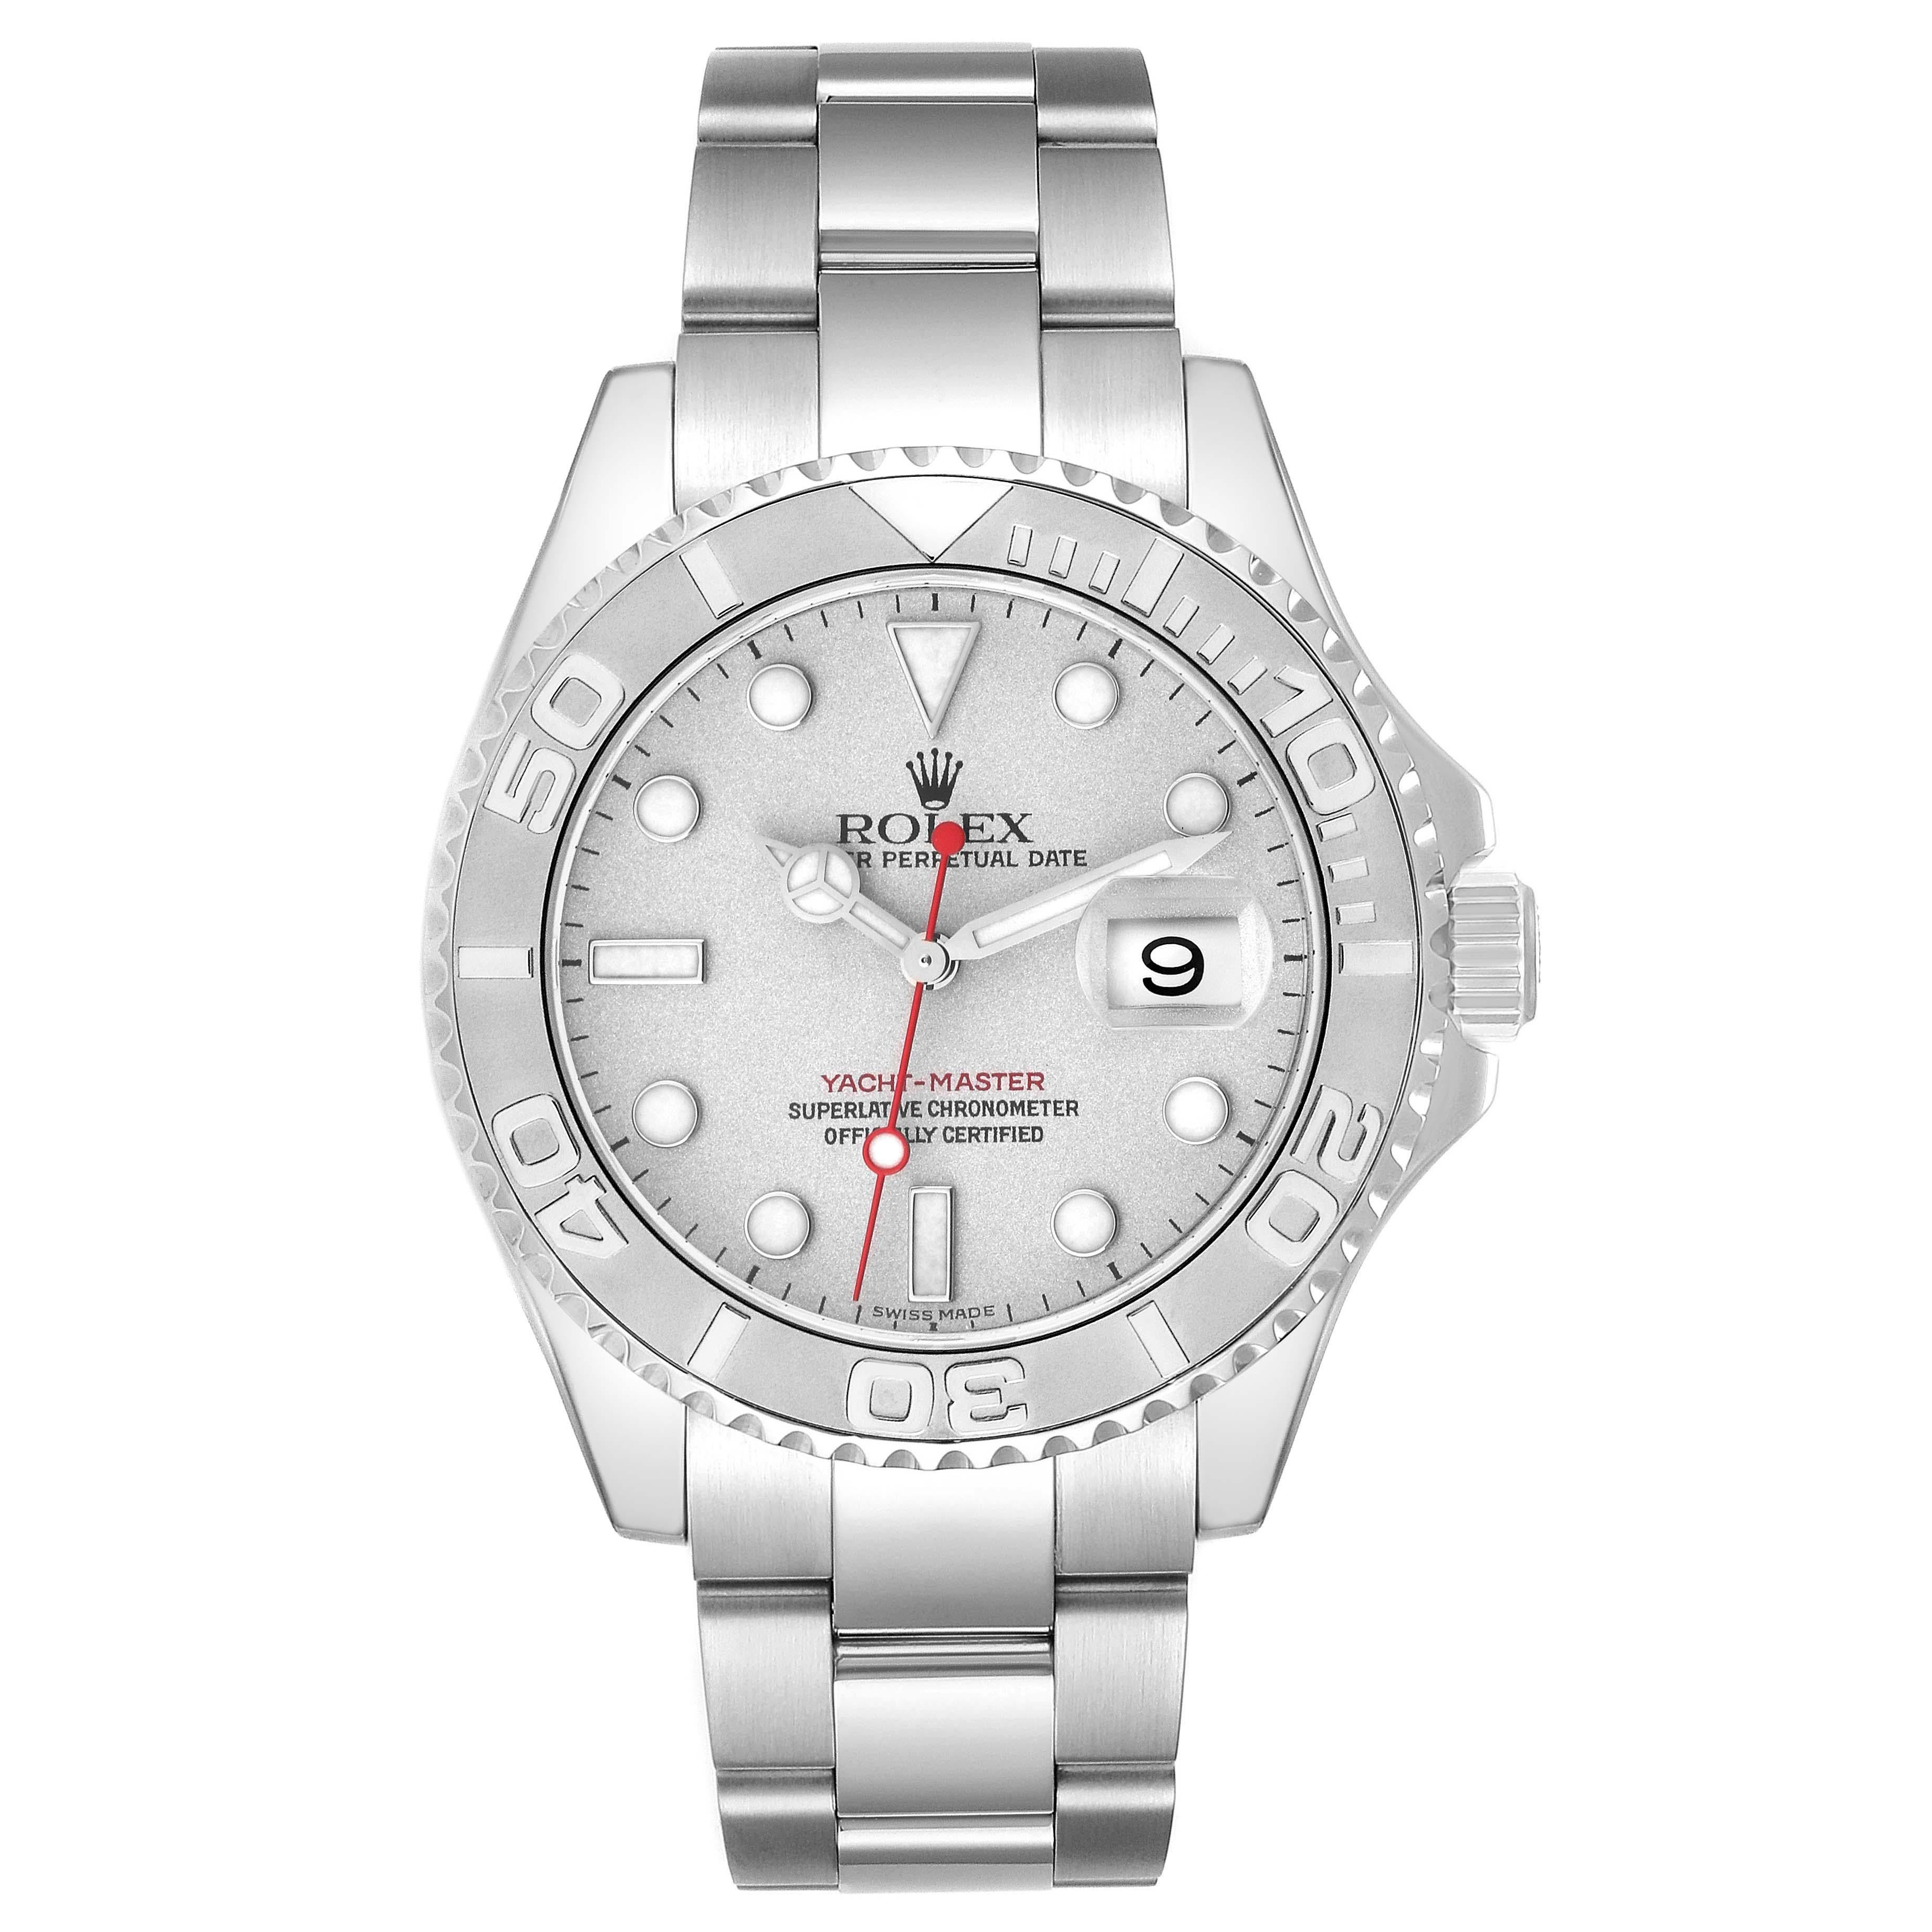 Rolex Yachtmaster Silver Dial Platinum Bezel Steel Mens Watch 16622 Box Papers. Officially certified chronometer automatic self-winding movement. Stainless steel case 40.0 mm in diameter. Rolex logo on the crown. Platinum special time-lapse